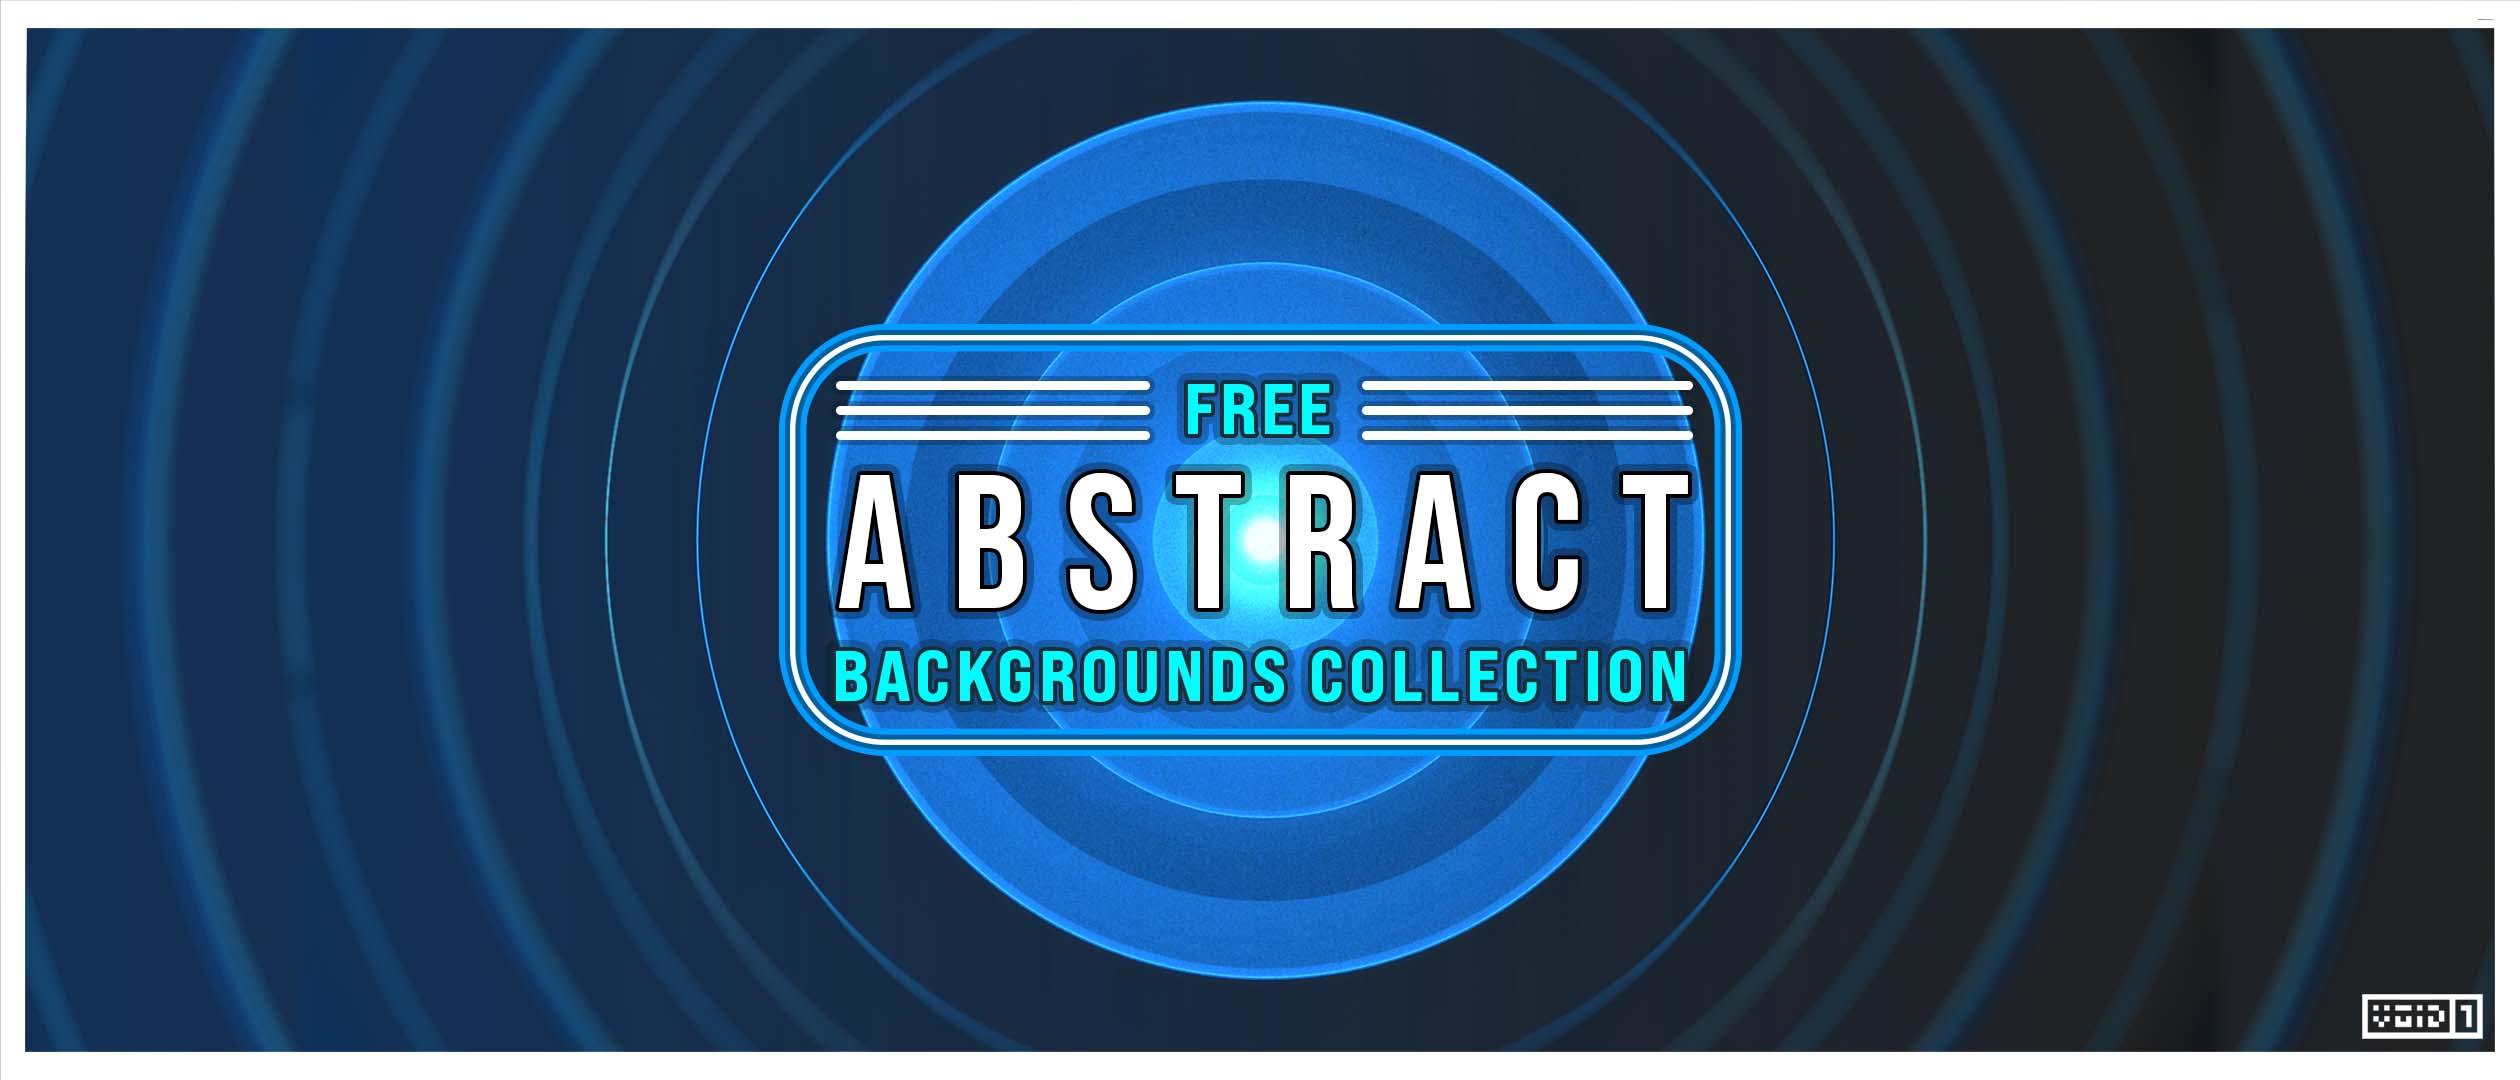 Free Abstract Backgrounds Collection